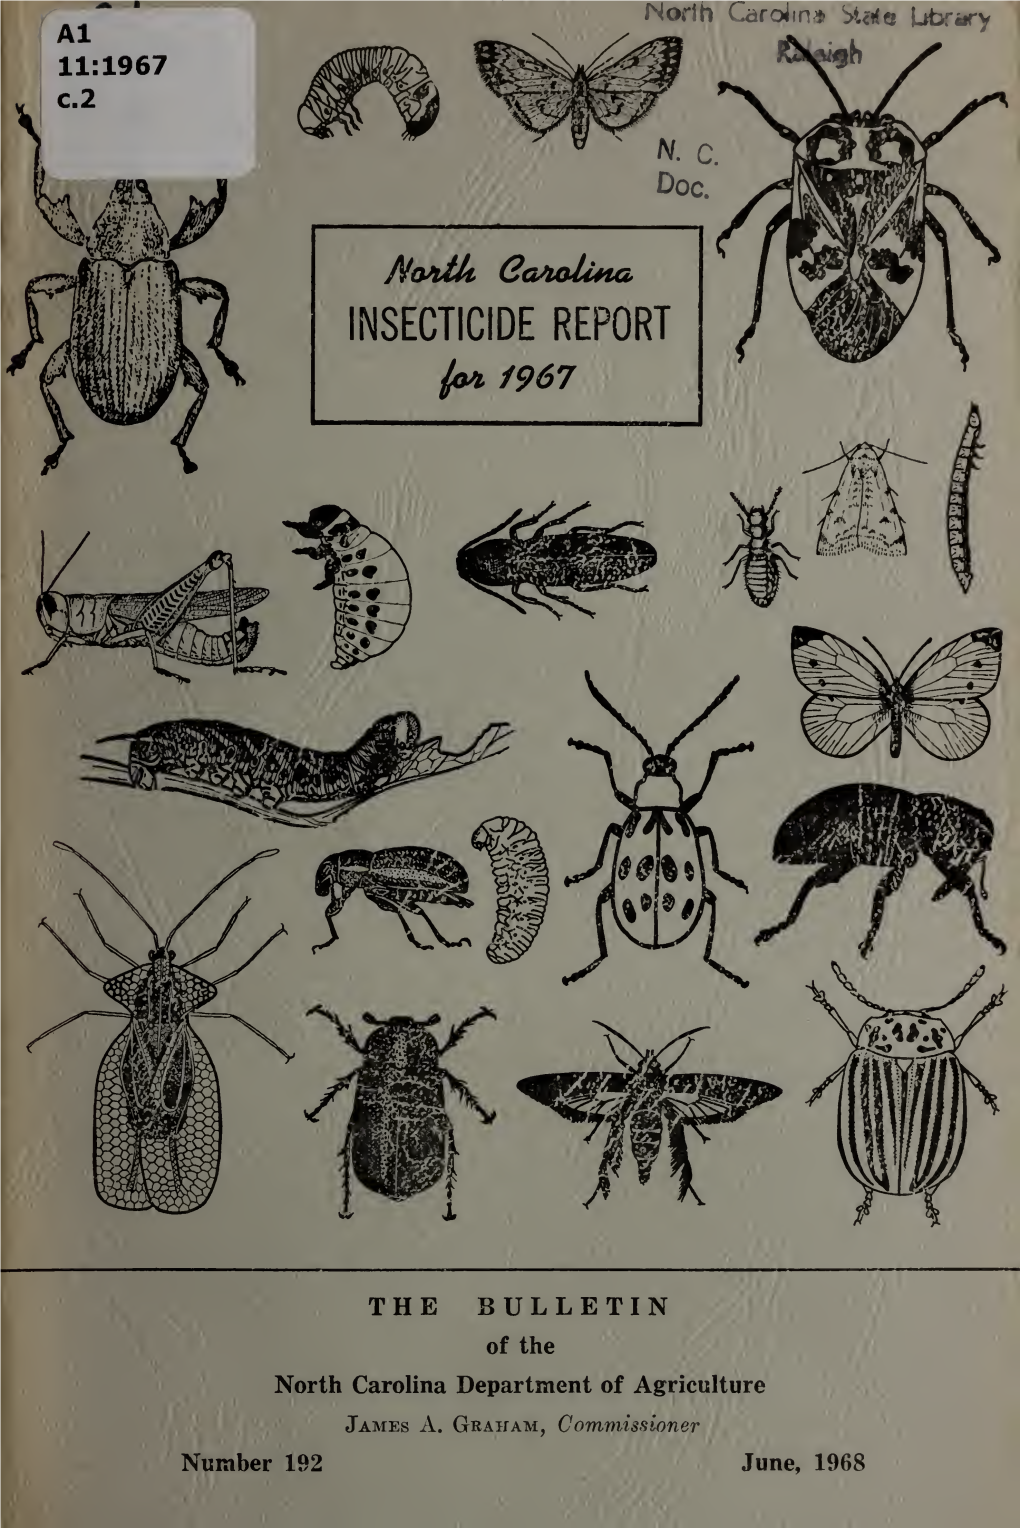 North Carolina Insecticide Report for 1967